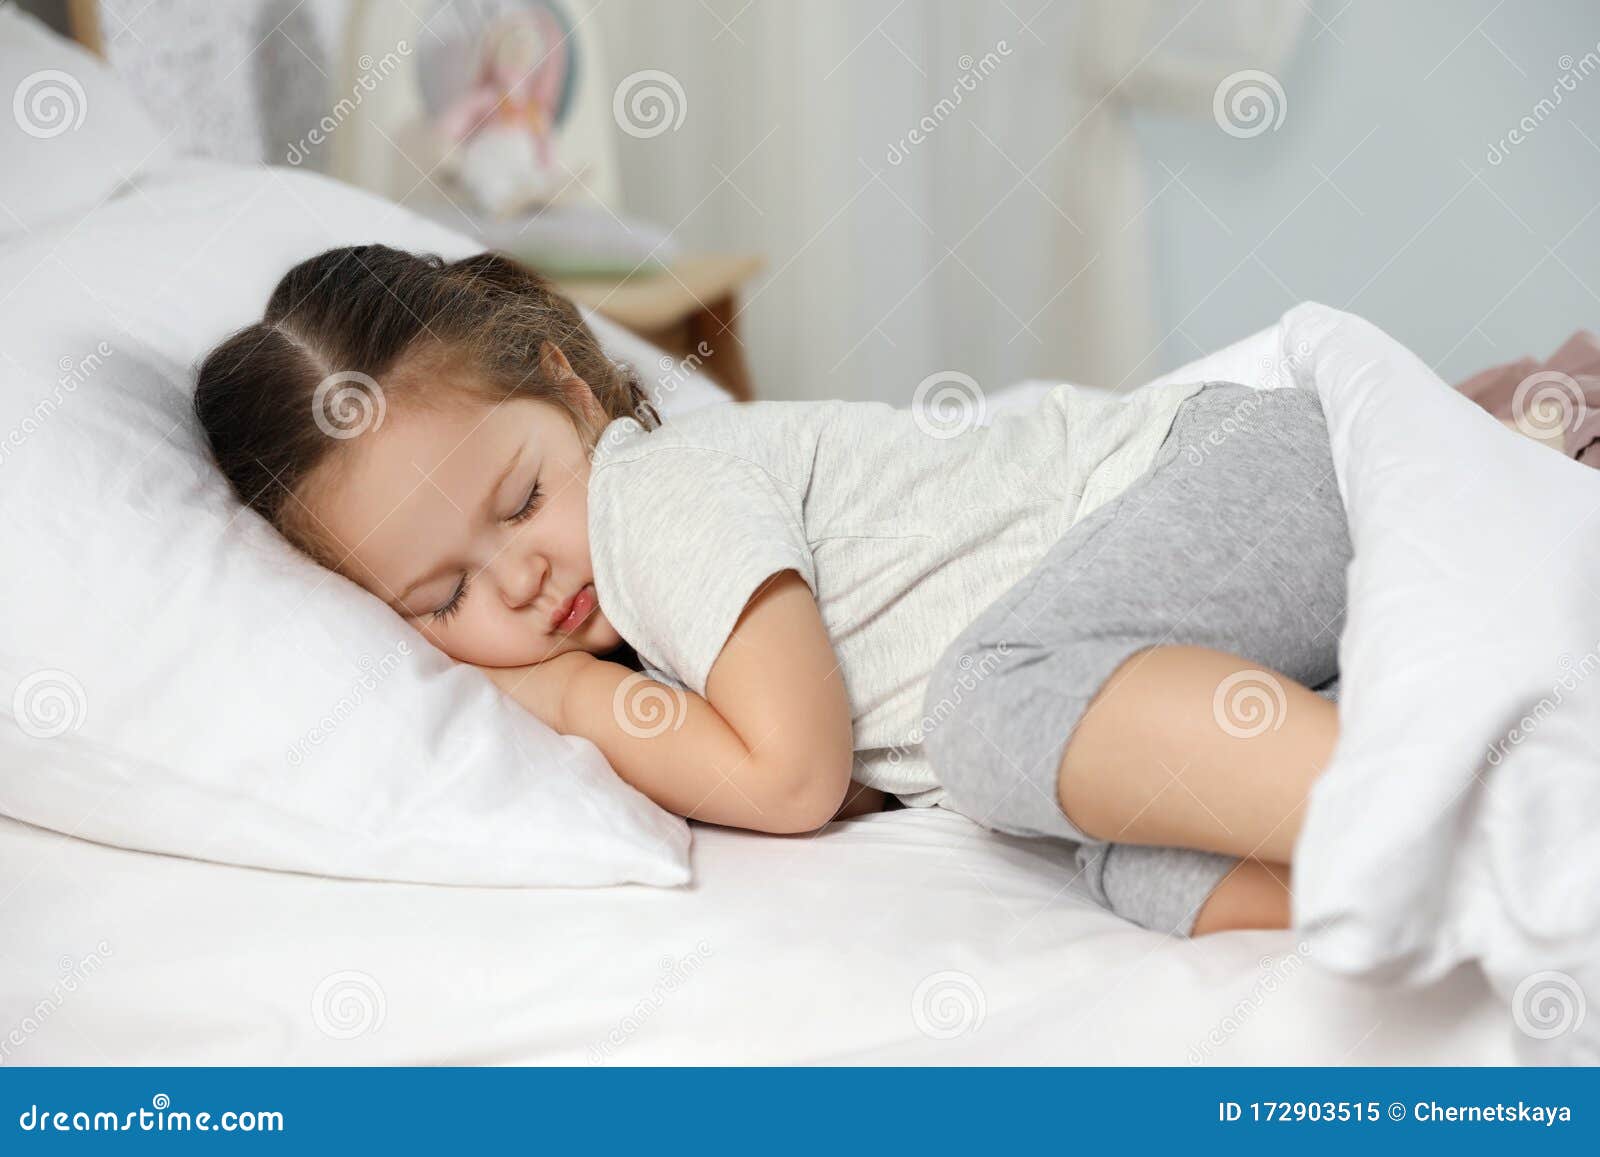 Cute Little Girl Sleeping at Home. Bedtime Stock Image - Image of ...